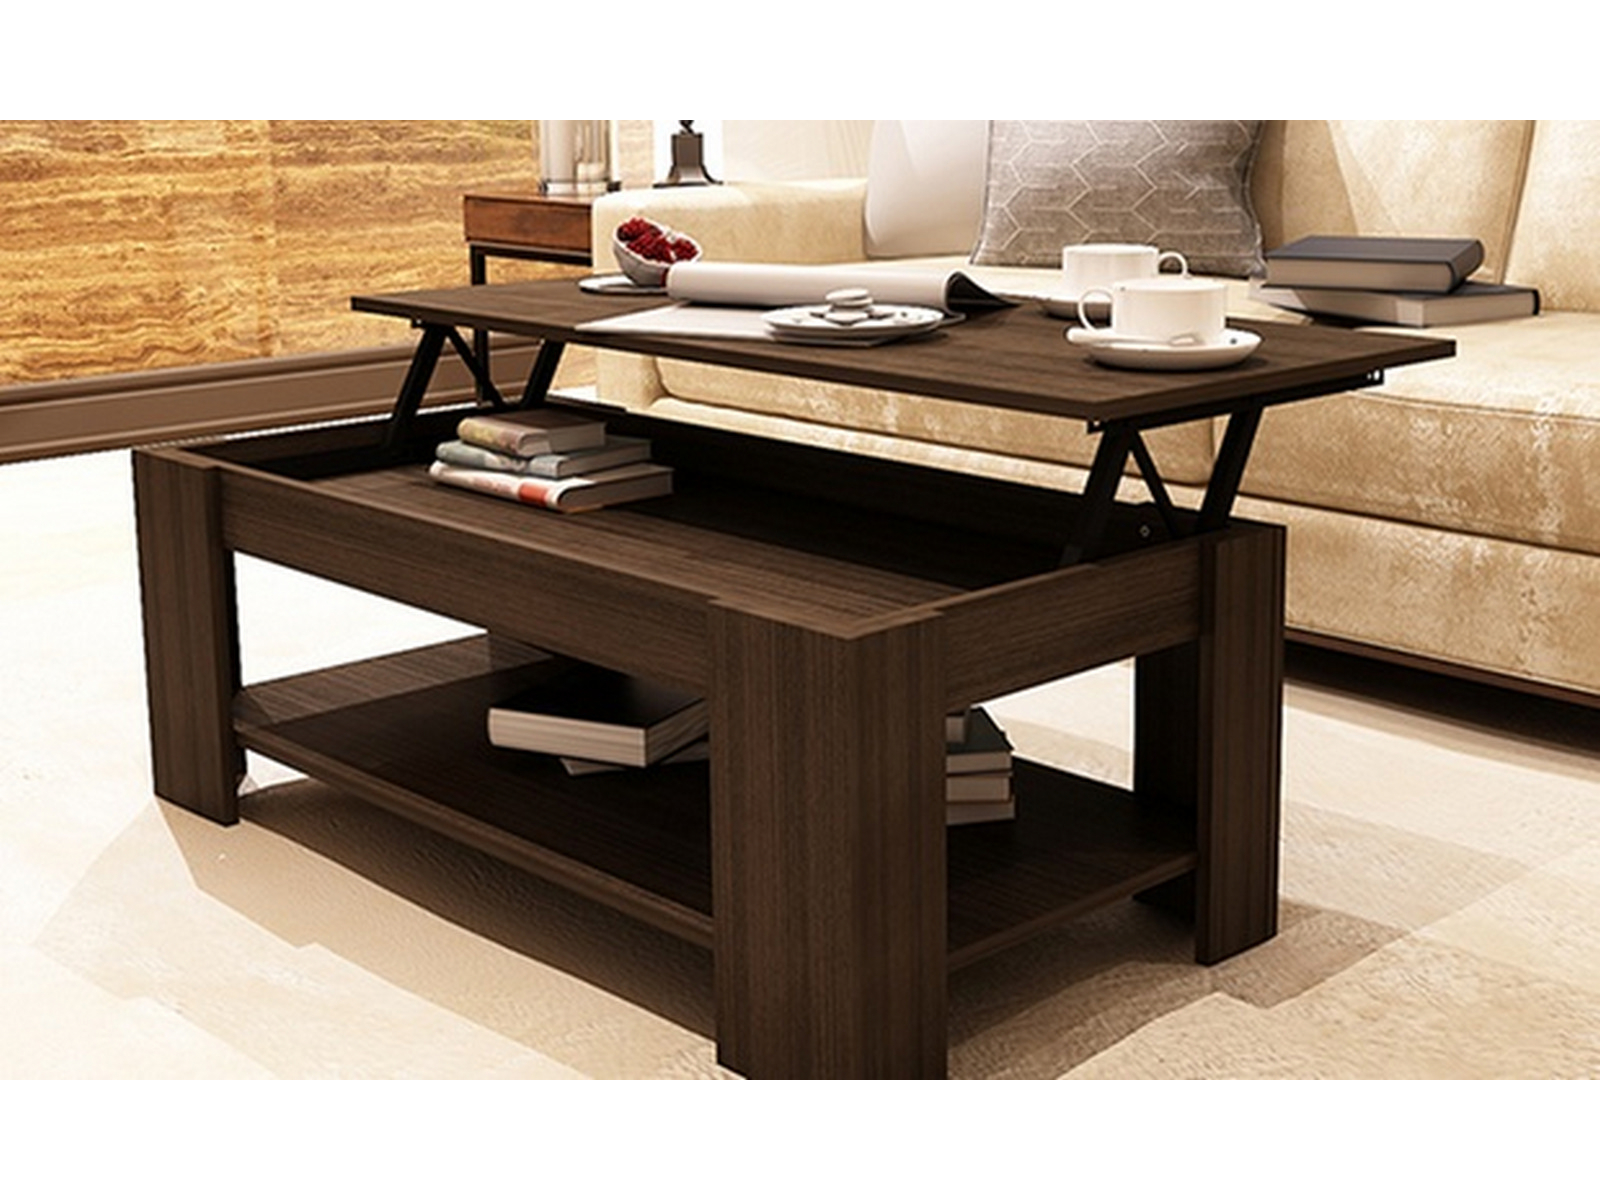 New Caspian Espresso Lift Up Top Coffee Table With Storage Shelf in proportions 1600 X 1200